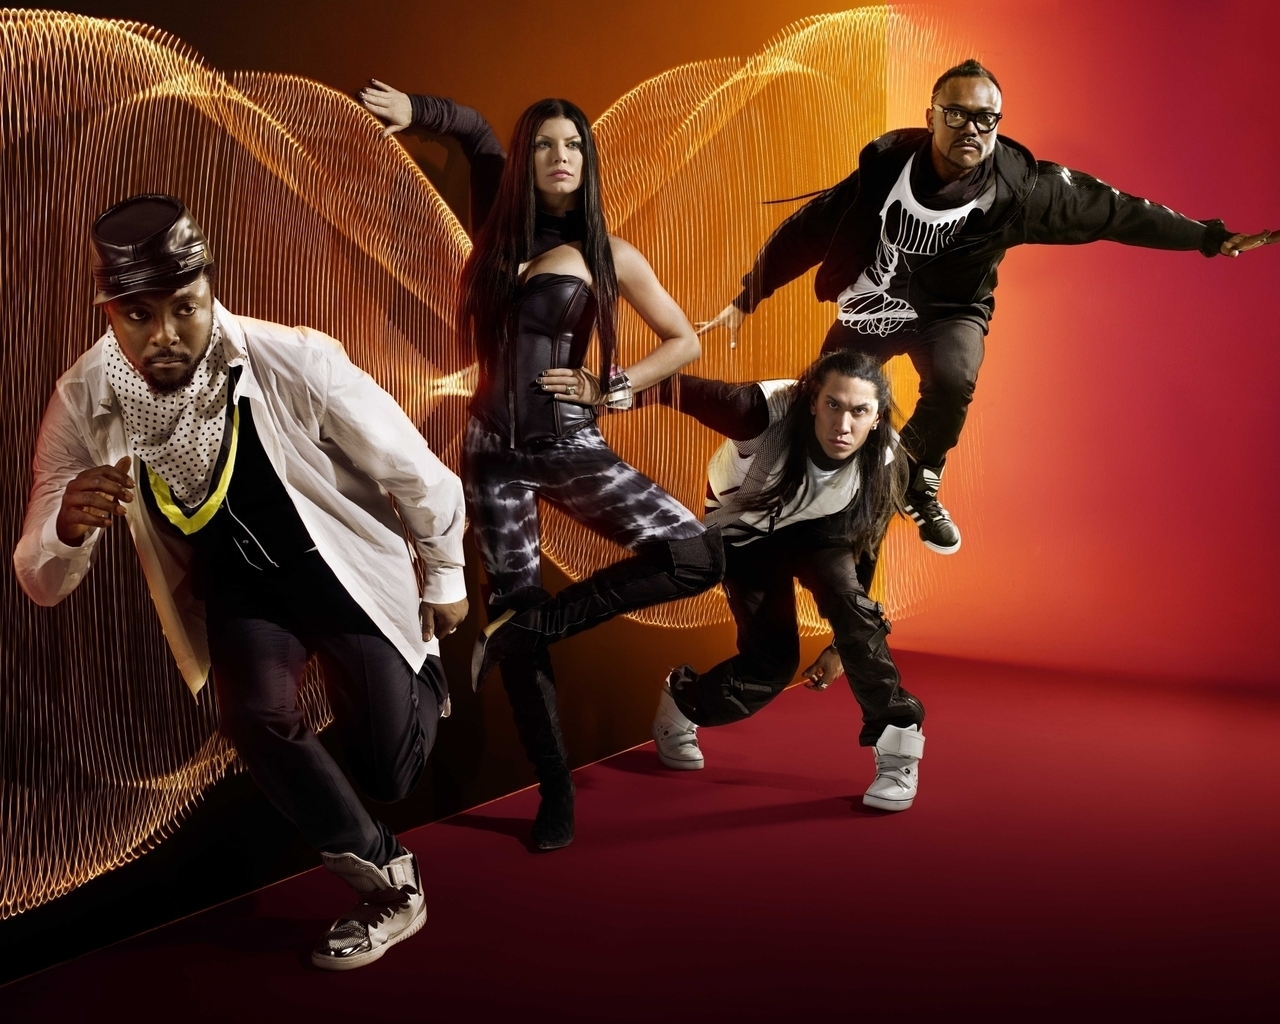 Black Eyed Peas Poster for 1280 x 1024 resolution